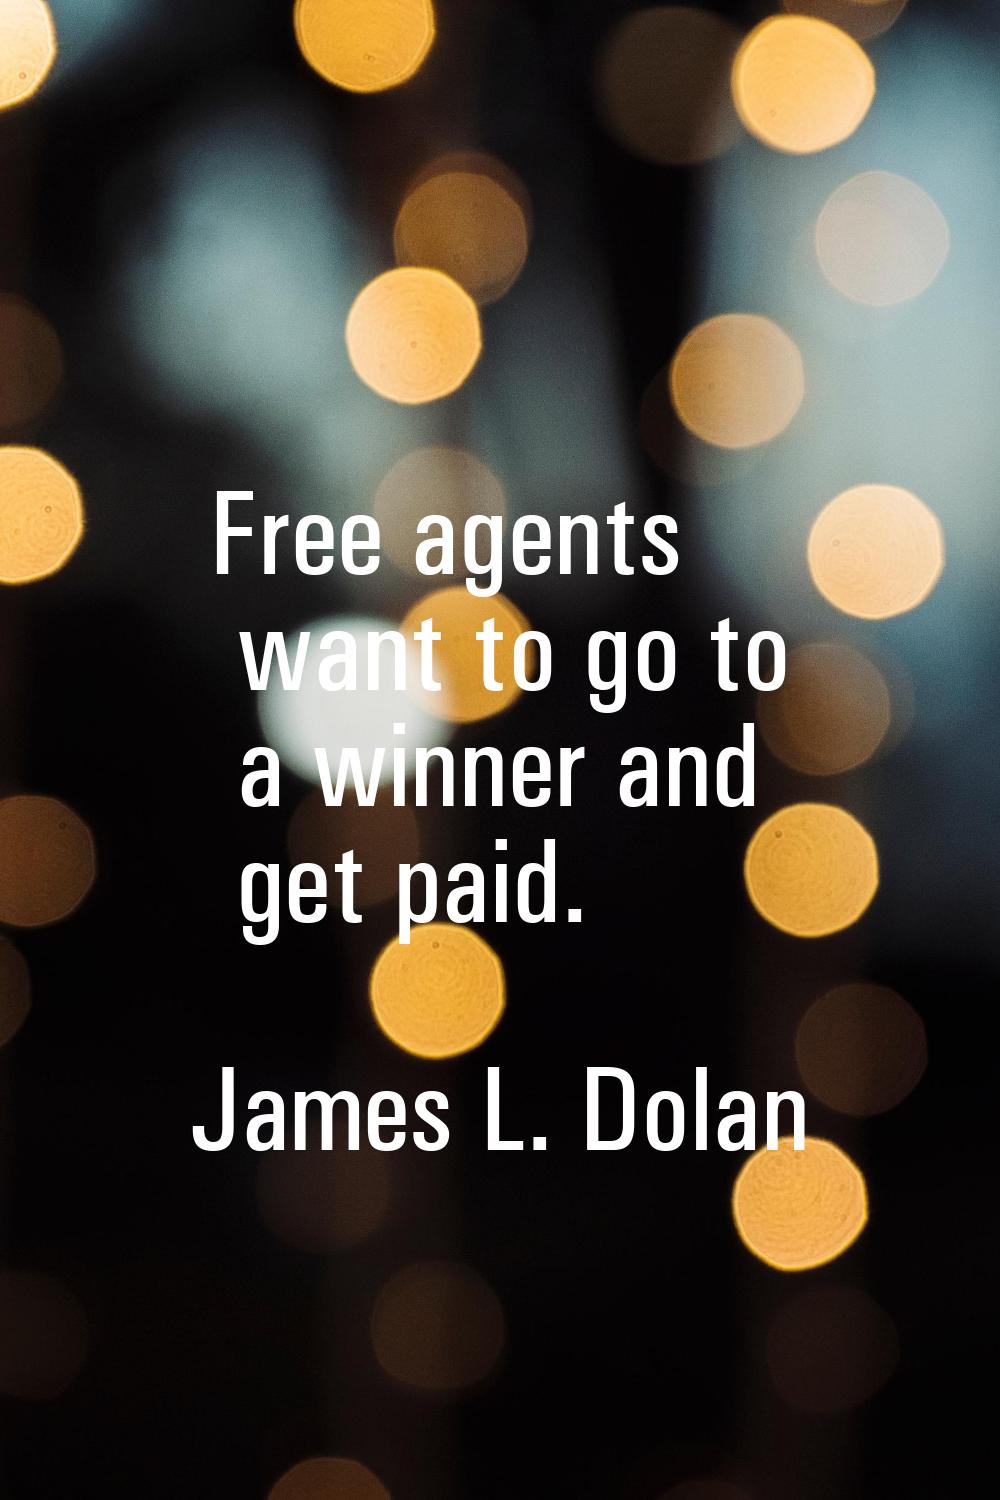 Free agents want to go to a winner and get paid.